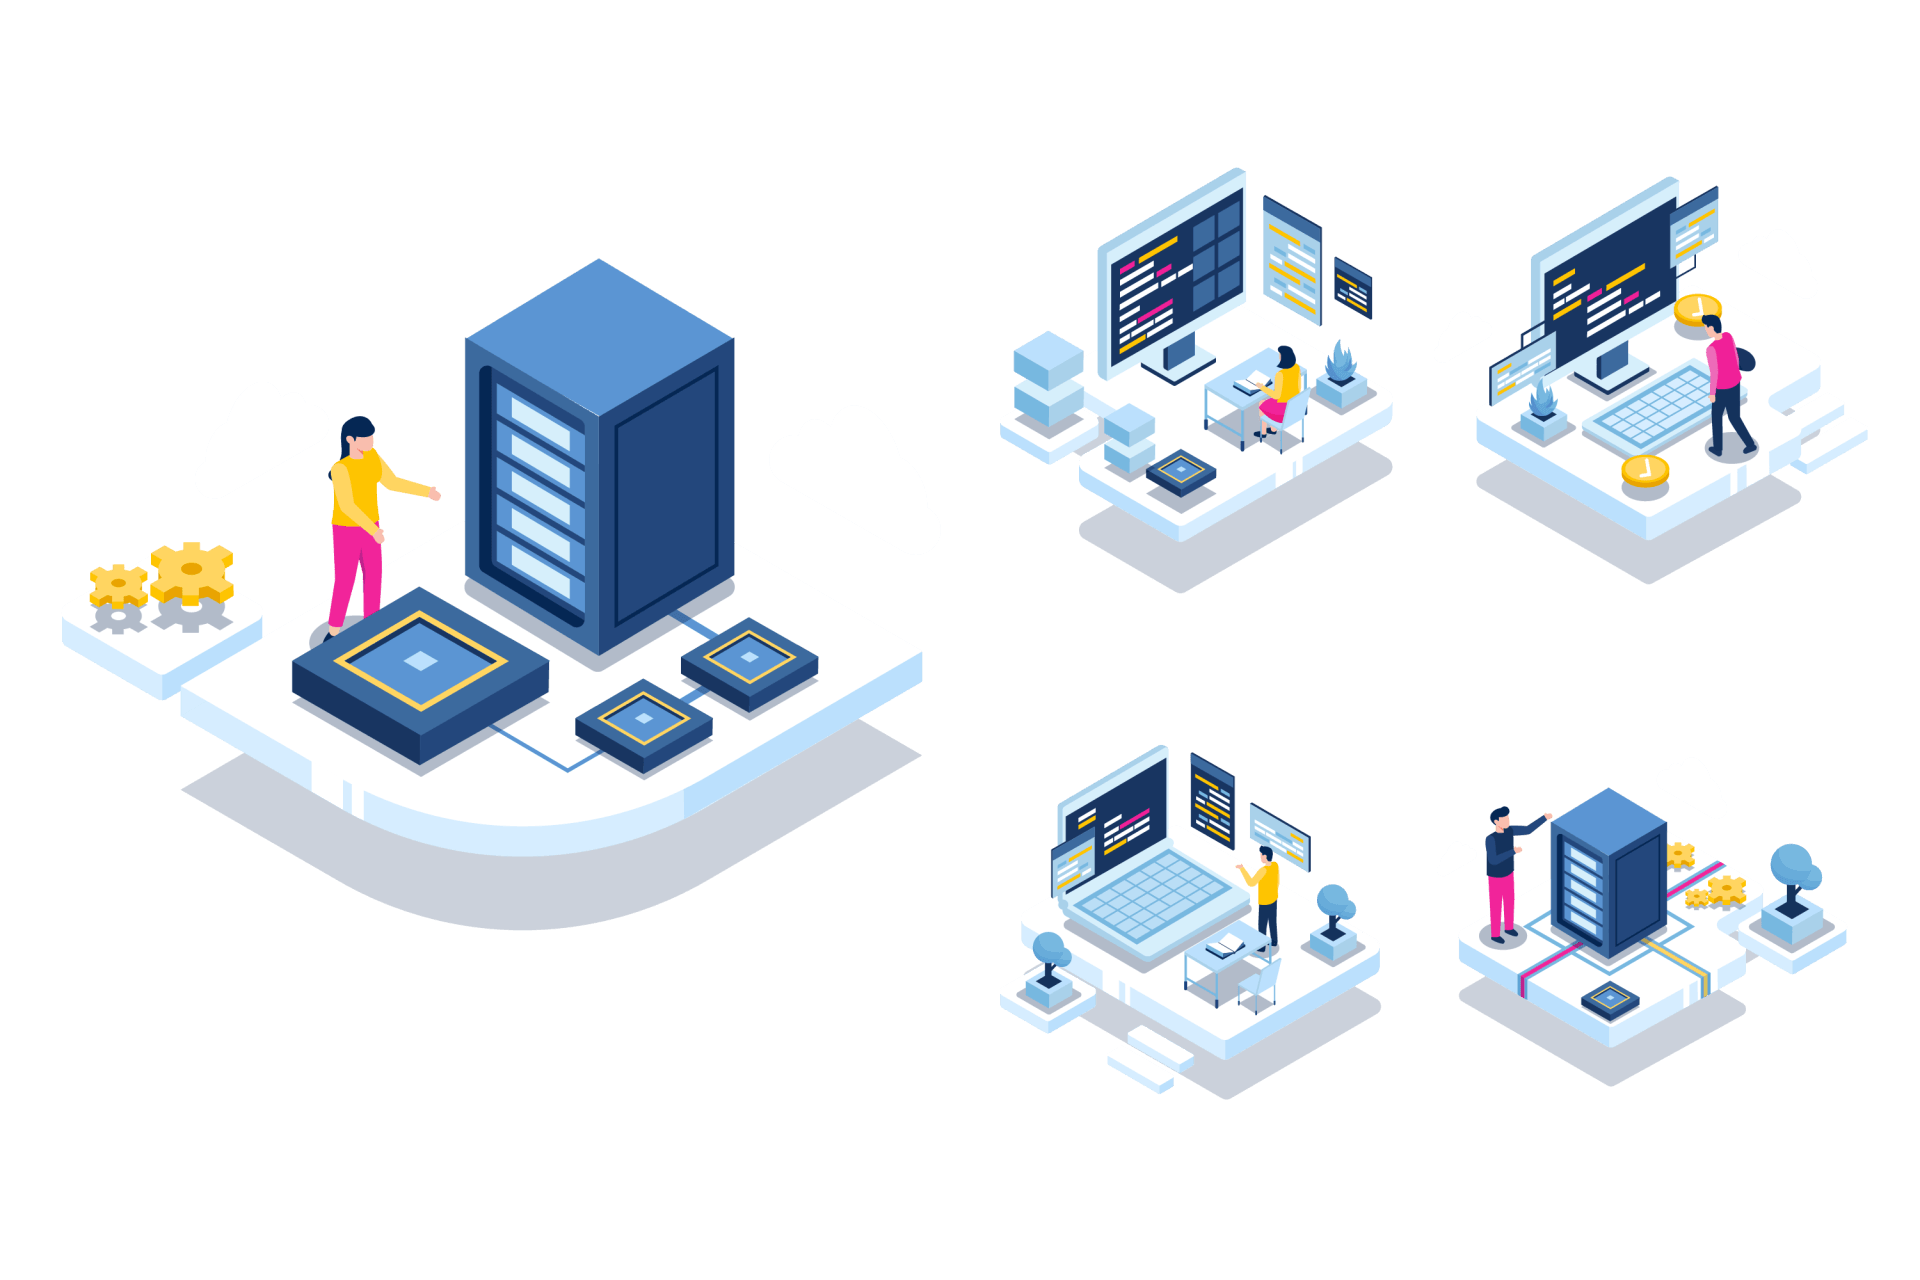 A set of isometric illustrations of people working on a computer.